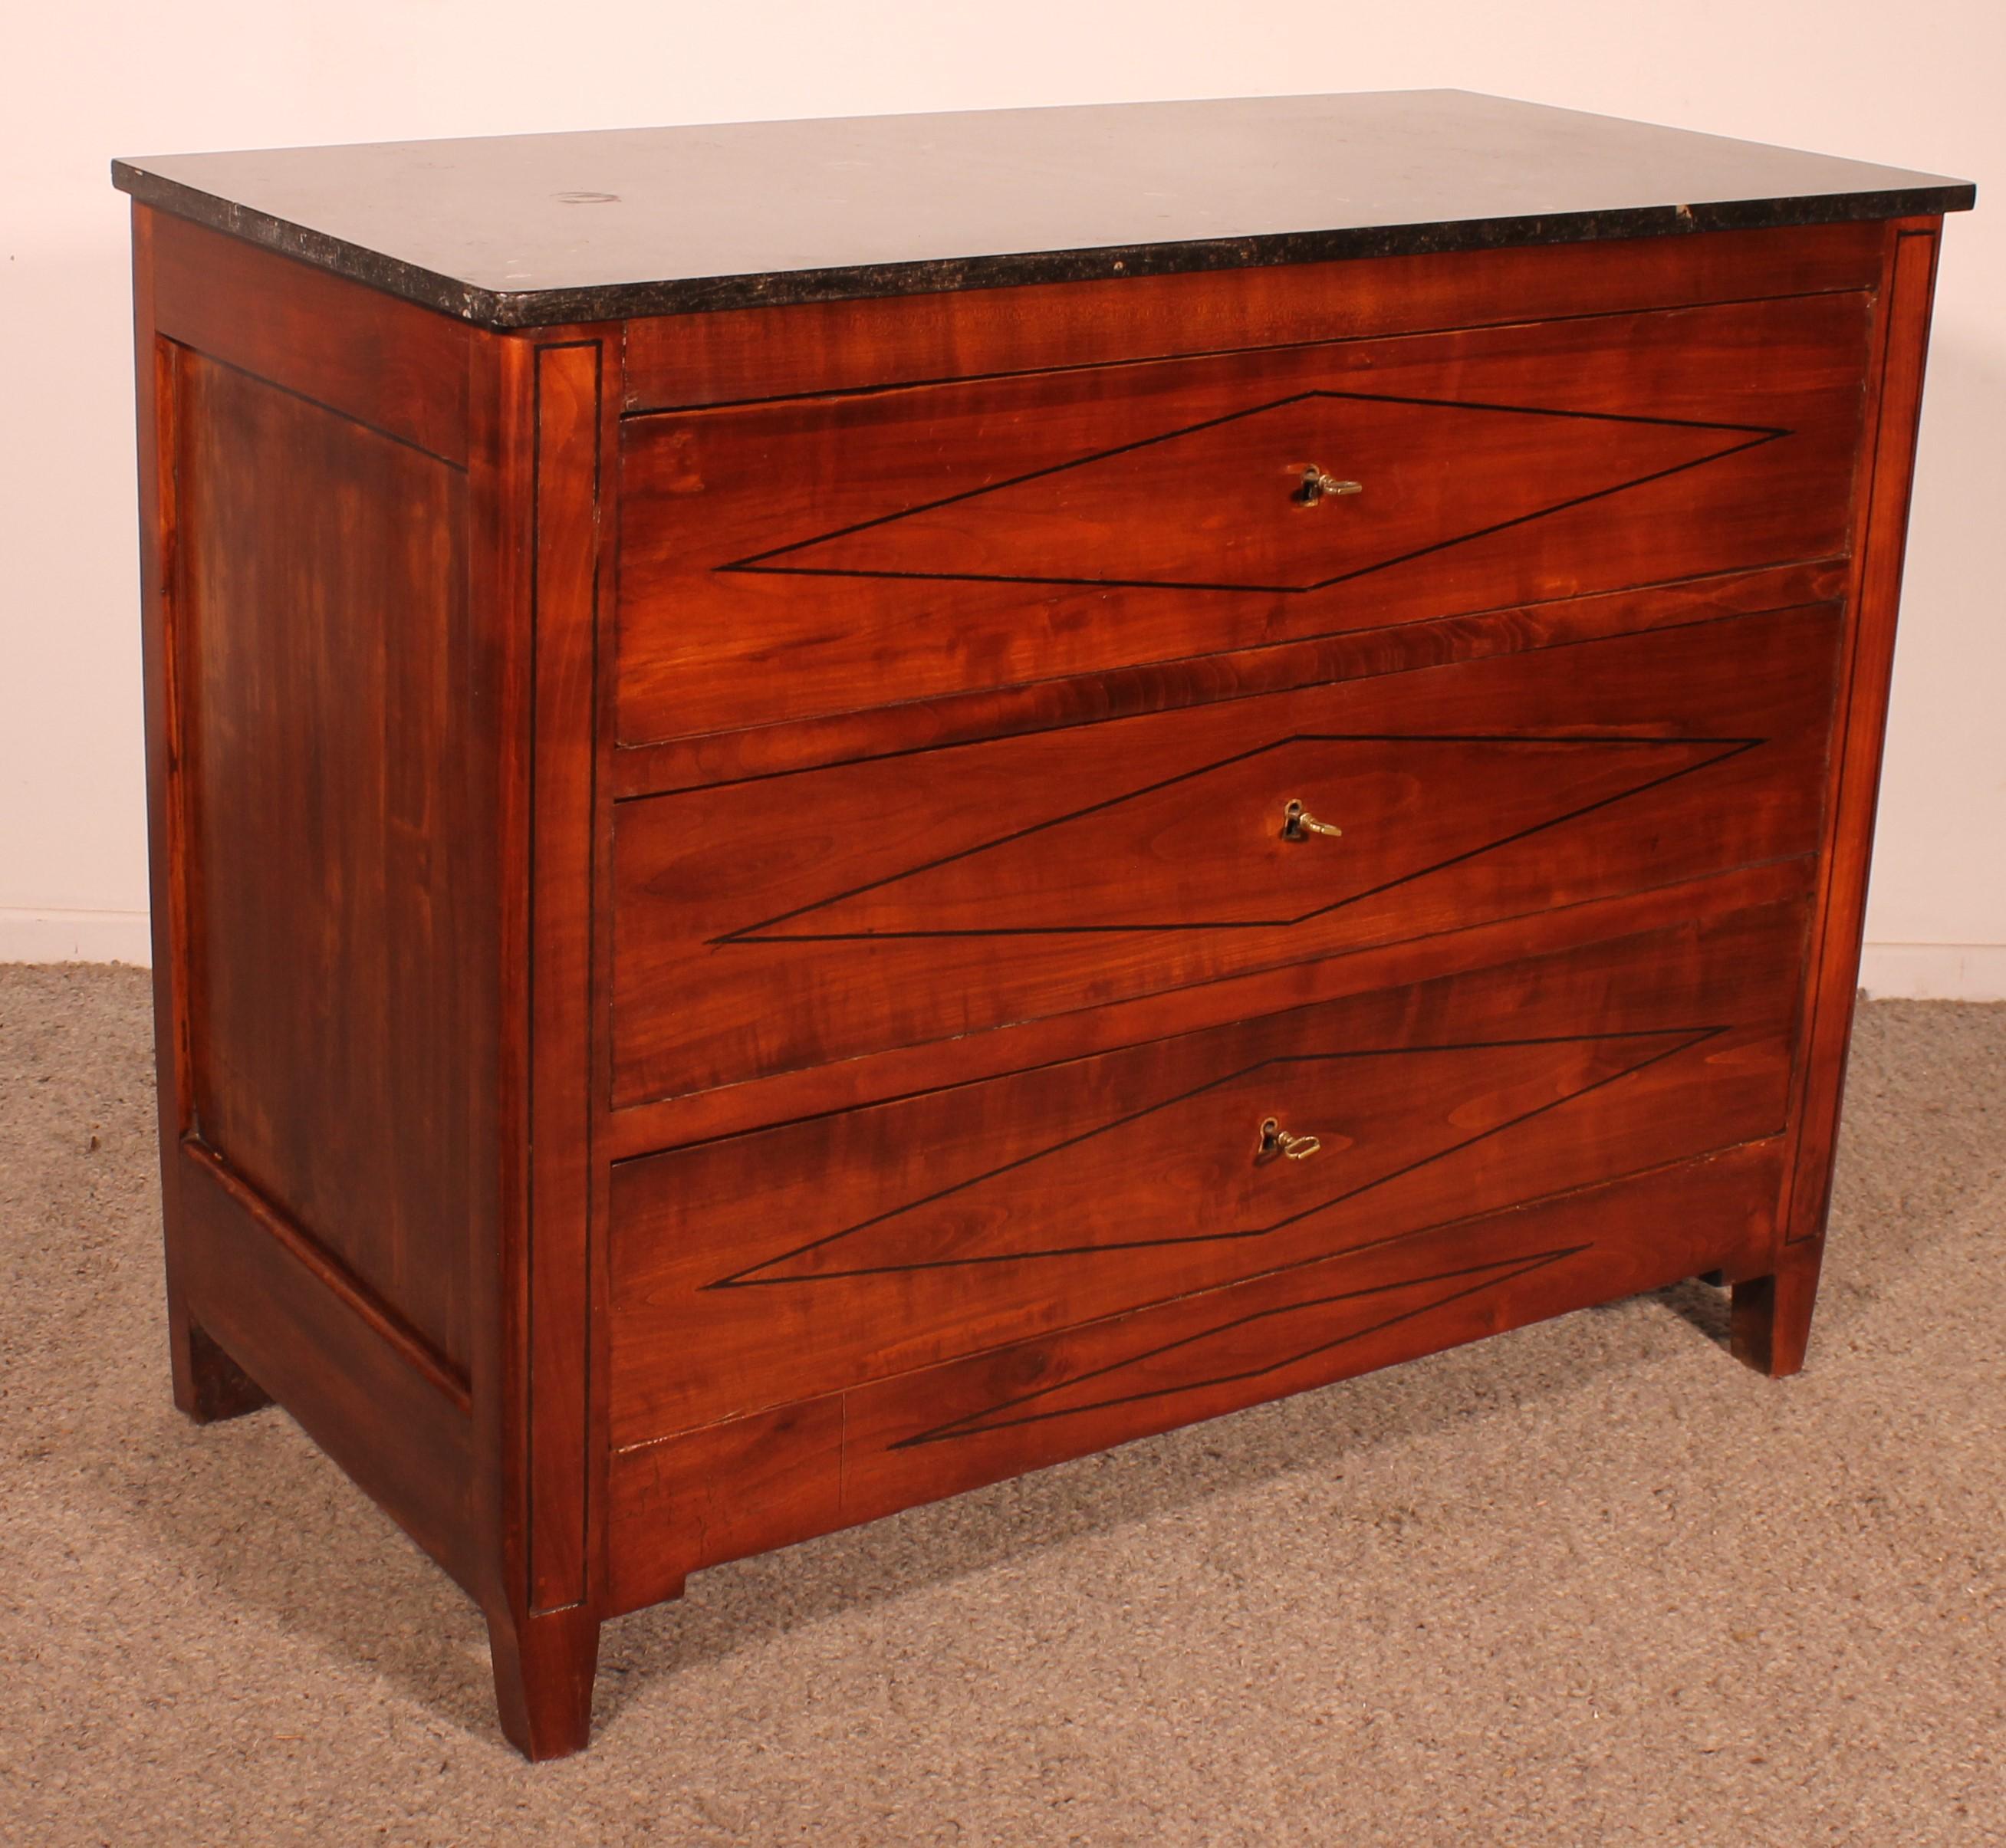 Cherry Wood Chest Of Drawers From The 19th Century In Good Condition For Sale In Brussels, Brussels